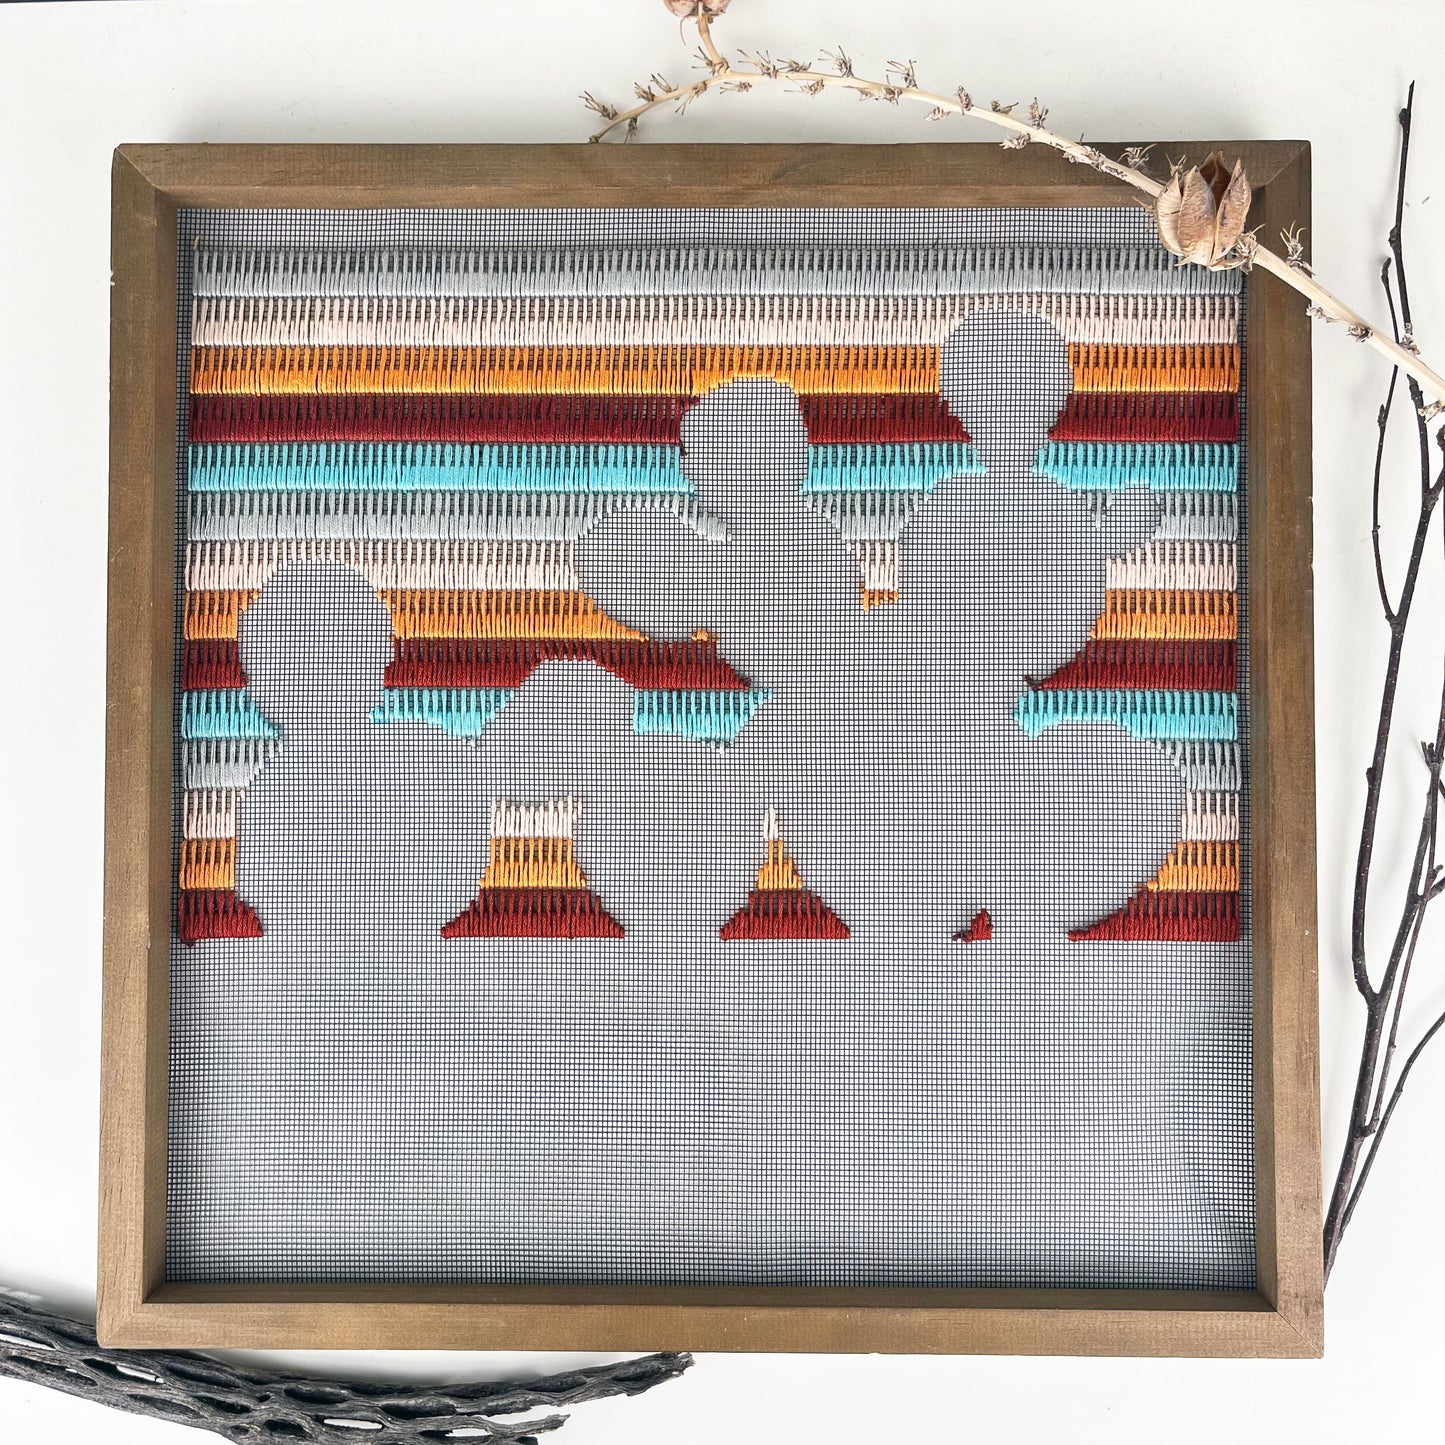 a piece of window screen hand stitched with rows of maroon orange peach grey and aqua blue stitches with an image in negative space of a prickly pear cactus, in a square wood frame, on a white counter, with dried yucca pods and cholla cactus around it